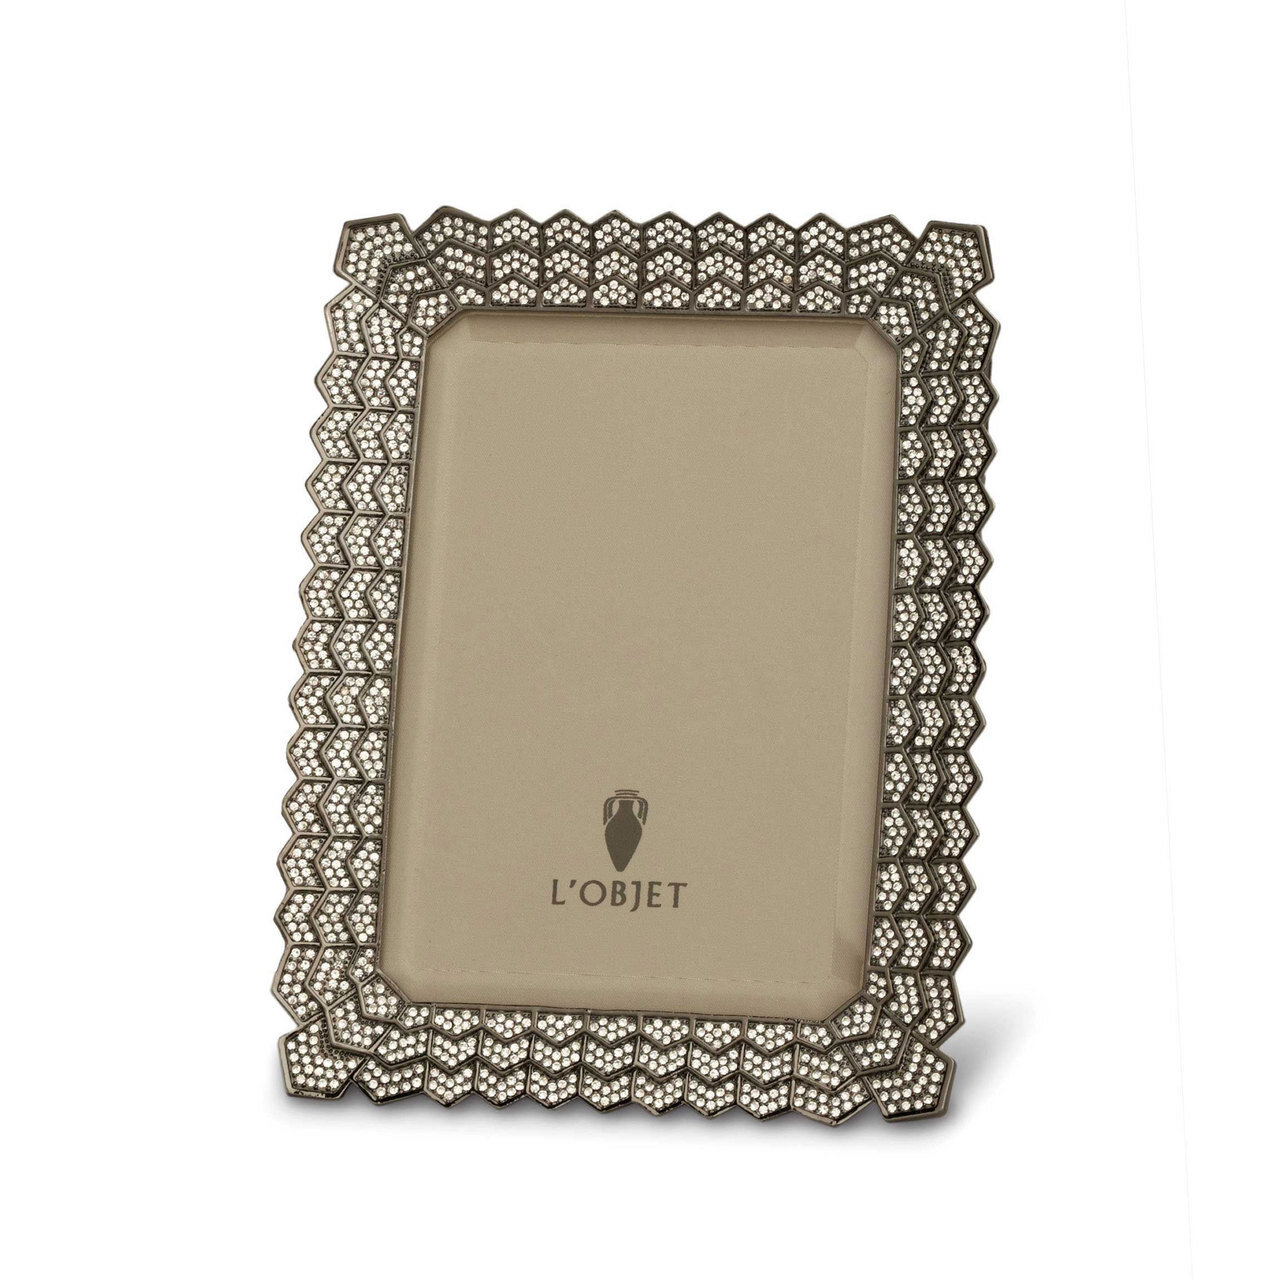 L'Objet Deco Noir 5 x 7 Inch Platinum with White Crystals Picture Frame